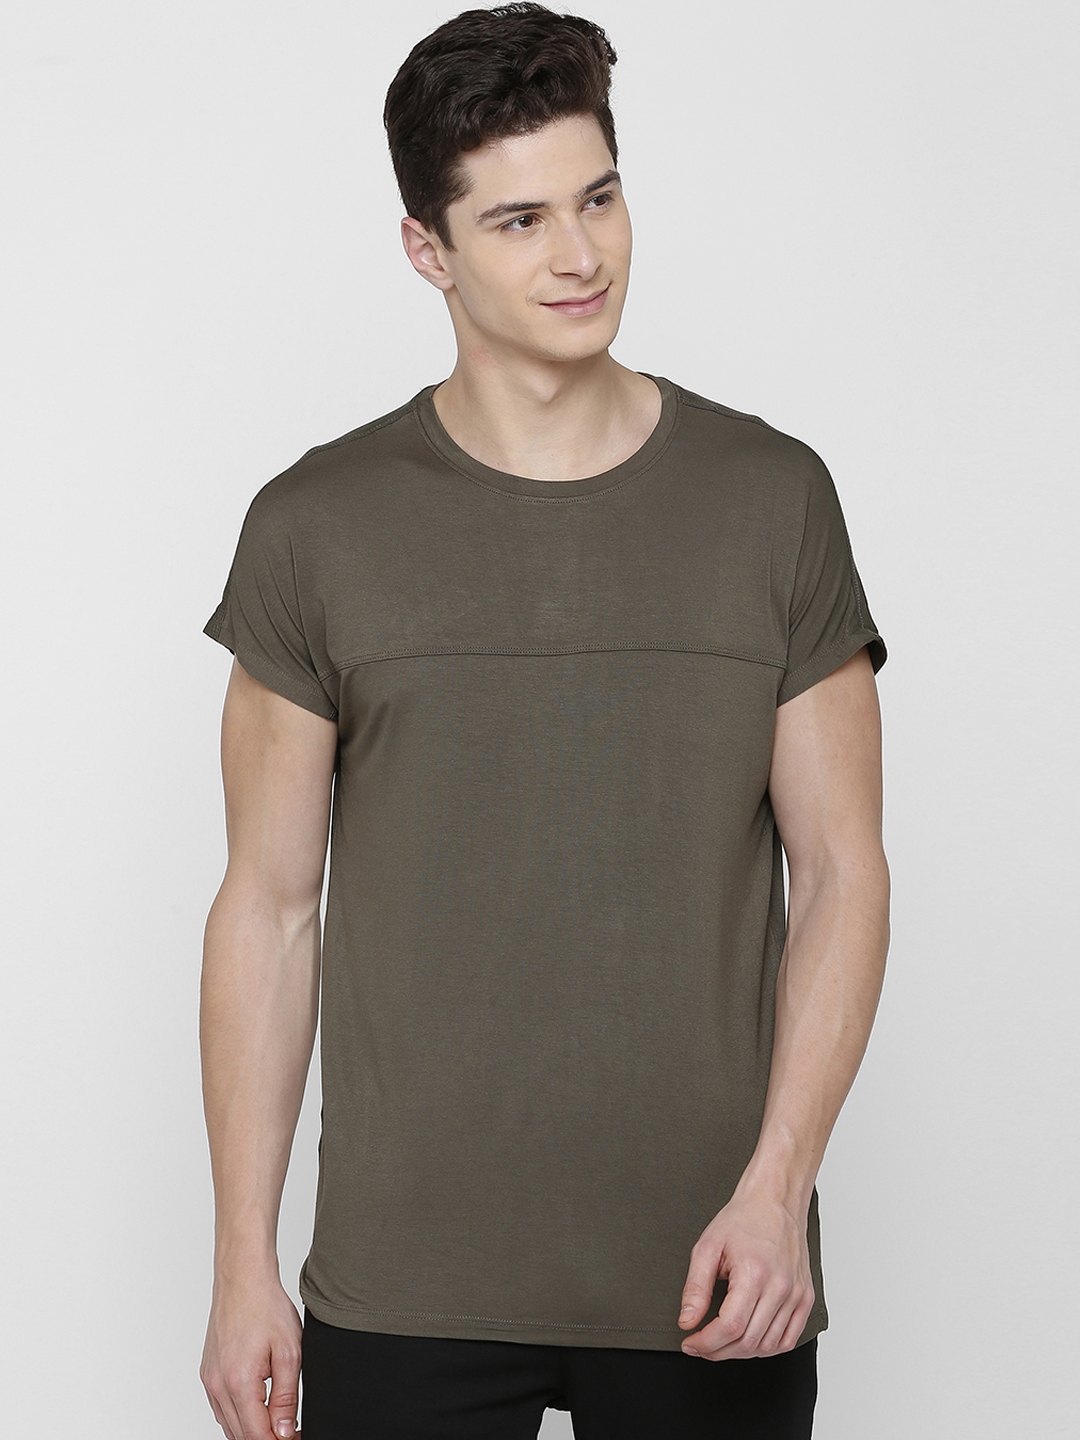 Buy SKULT By Shahid Kapoor Men Brown Solid Round Neck T Shirt - Tshirts ...